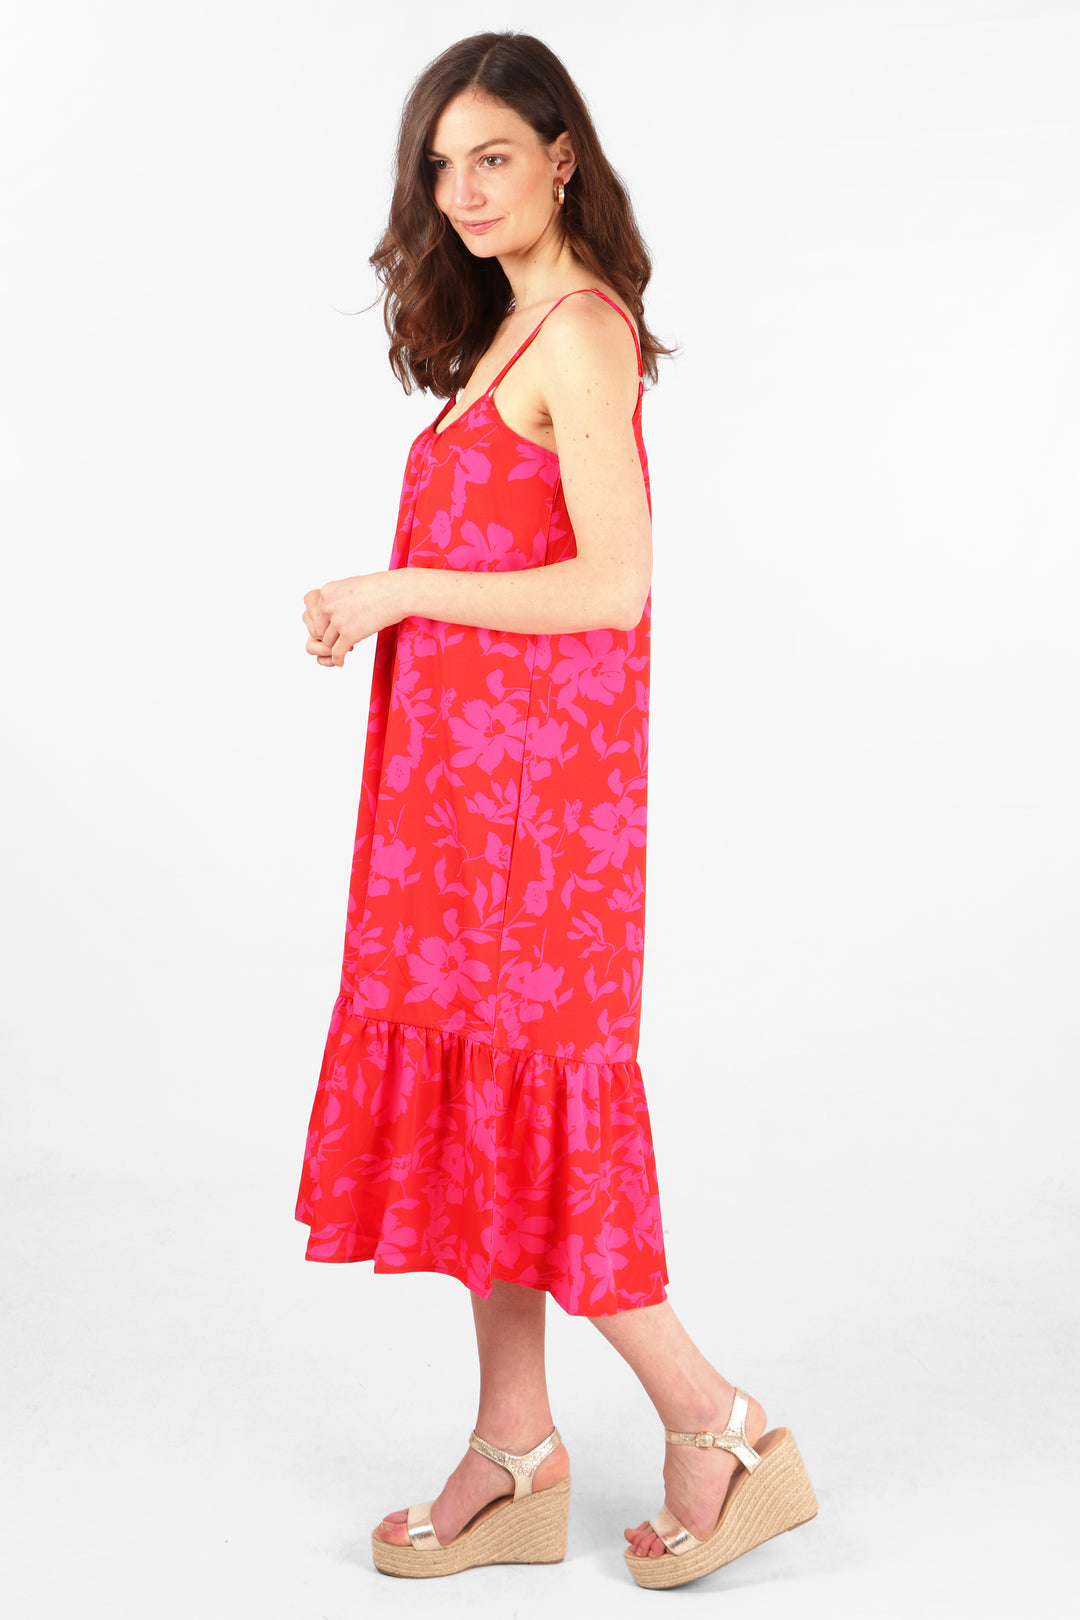 model wearing a red and pink floral print midi slip dress with spaghetti straps and a tiered hem